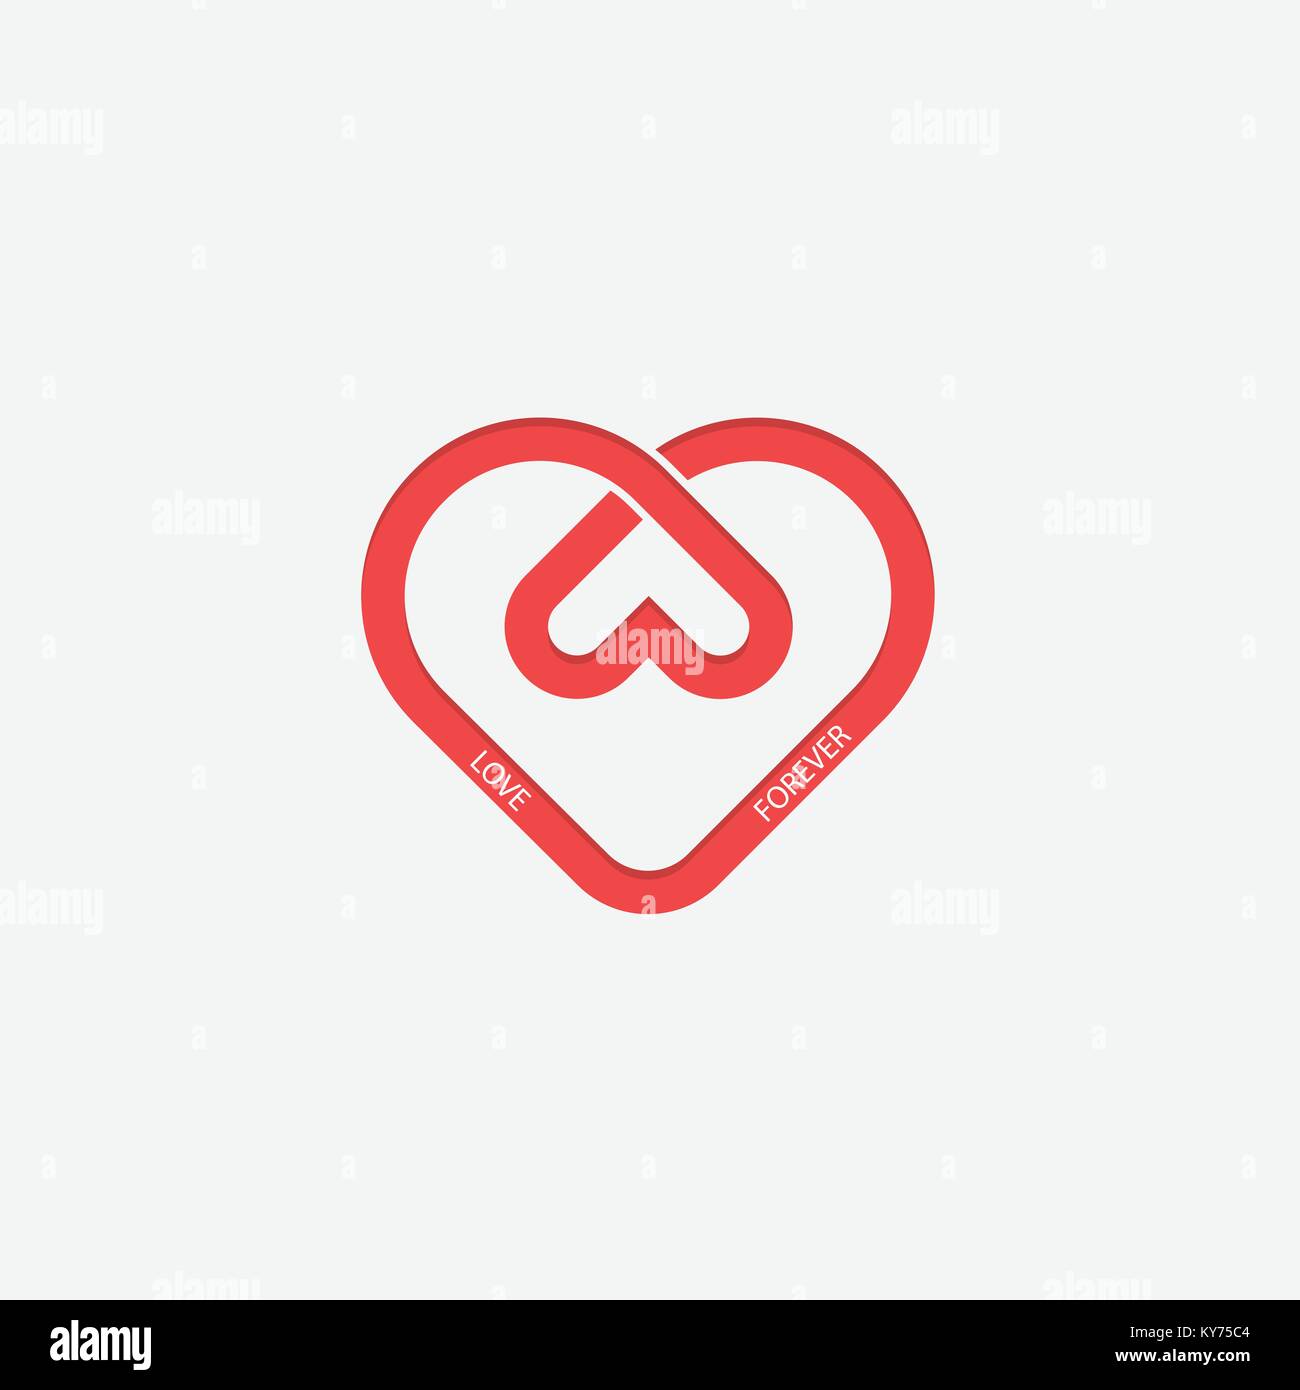 Heart icons vector logo design template.Love symbol.Valentine's Day sign.Emblem isolated on white background.Vector illustration Stock Vector